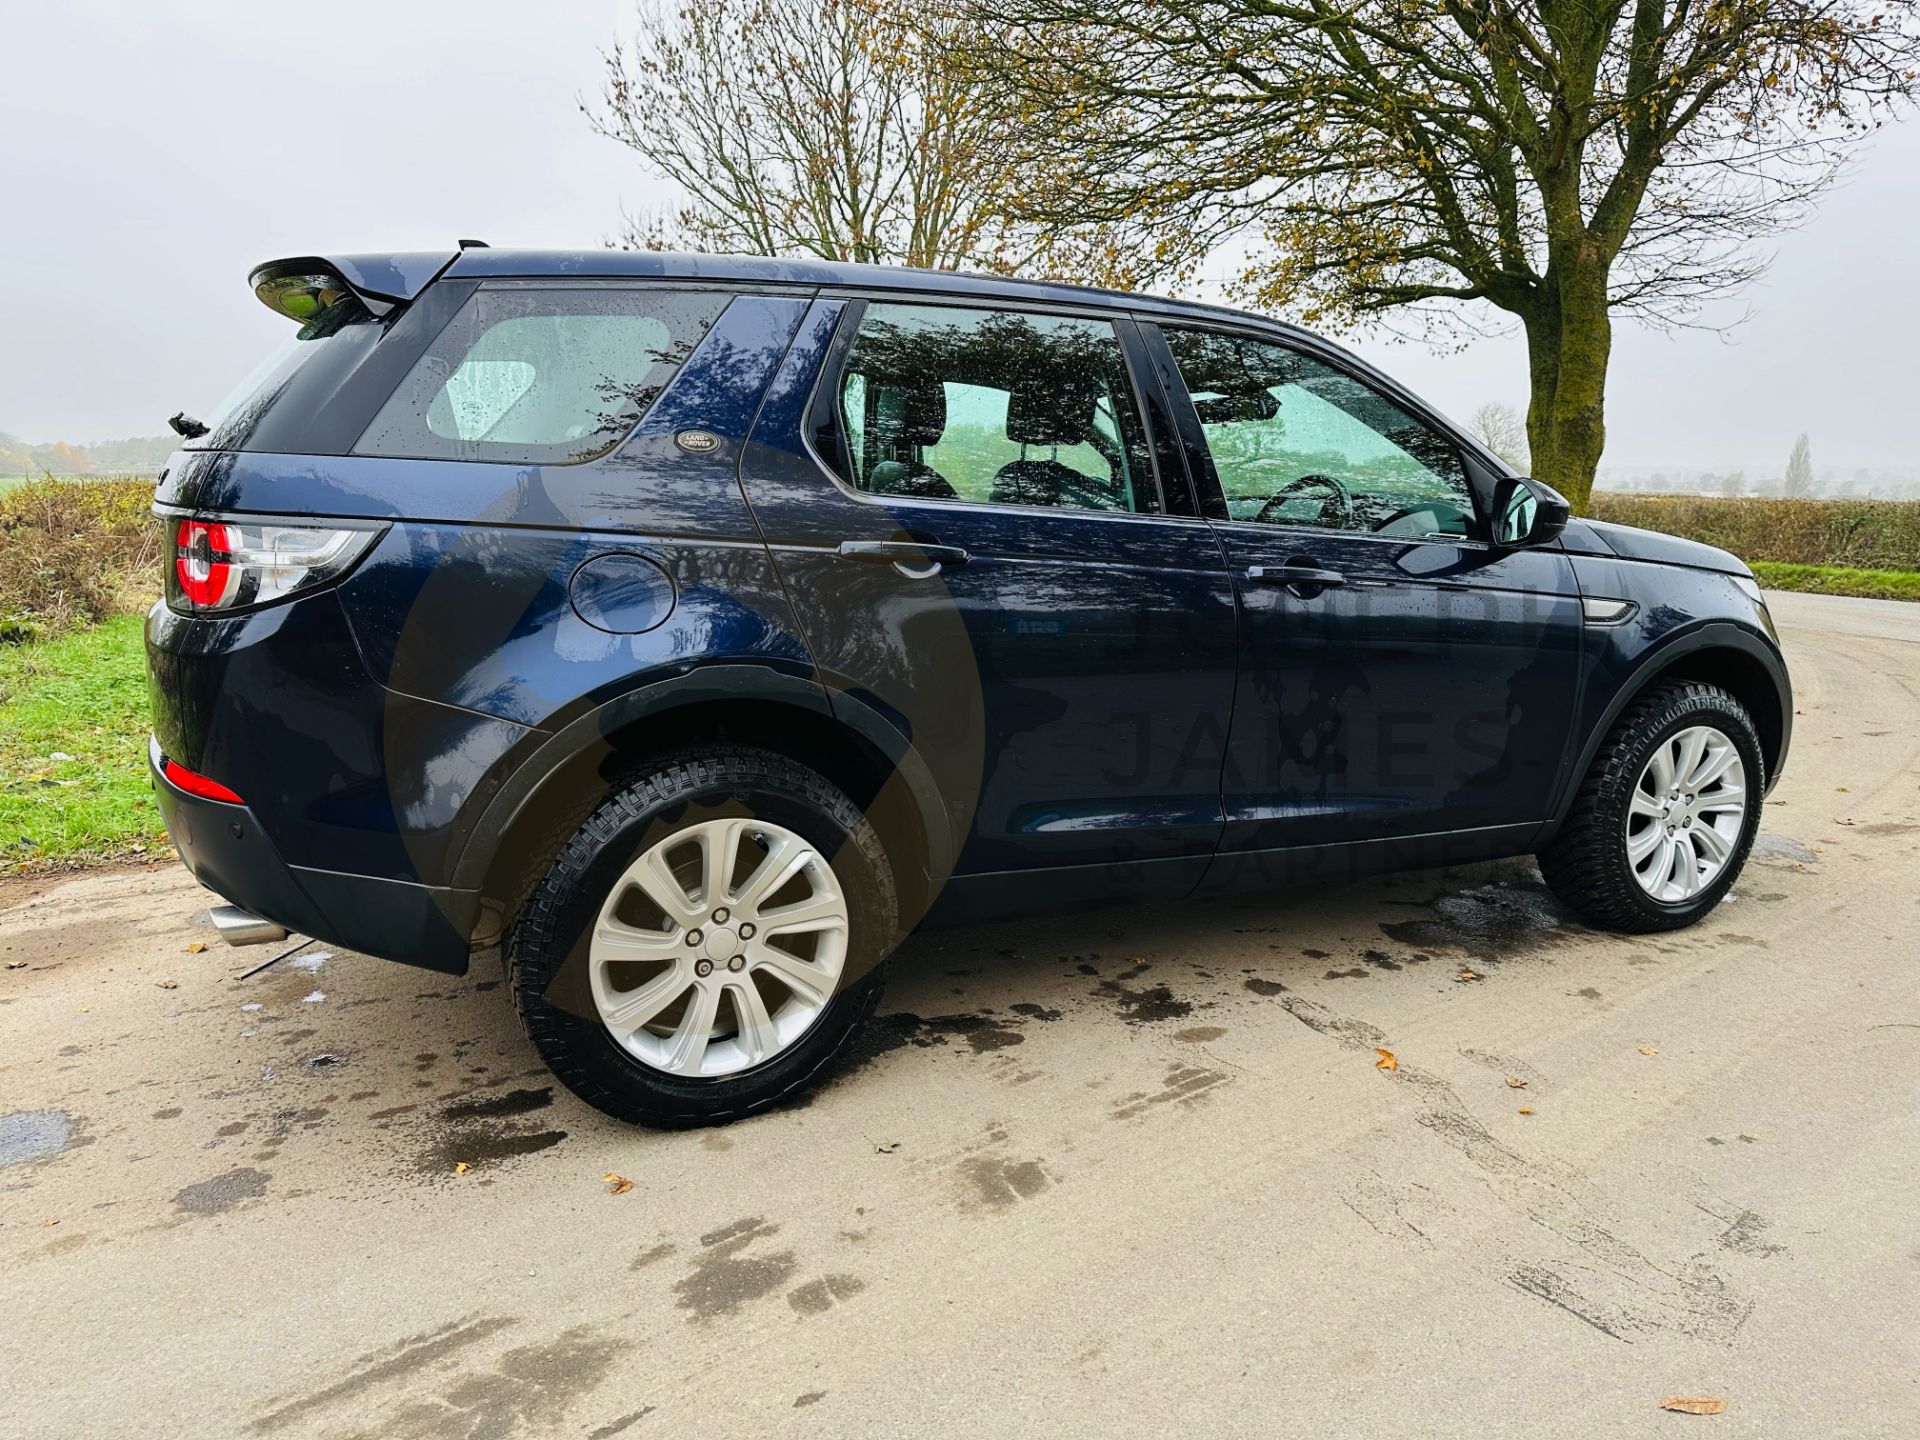 (ON SALE) LAND ROVER DISCOVERY SPORT *SE TECH* 2017 MODEL - FULL SERVICE HISTORY -1 OWNER - NO VAT!! - Image 15 of 43